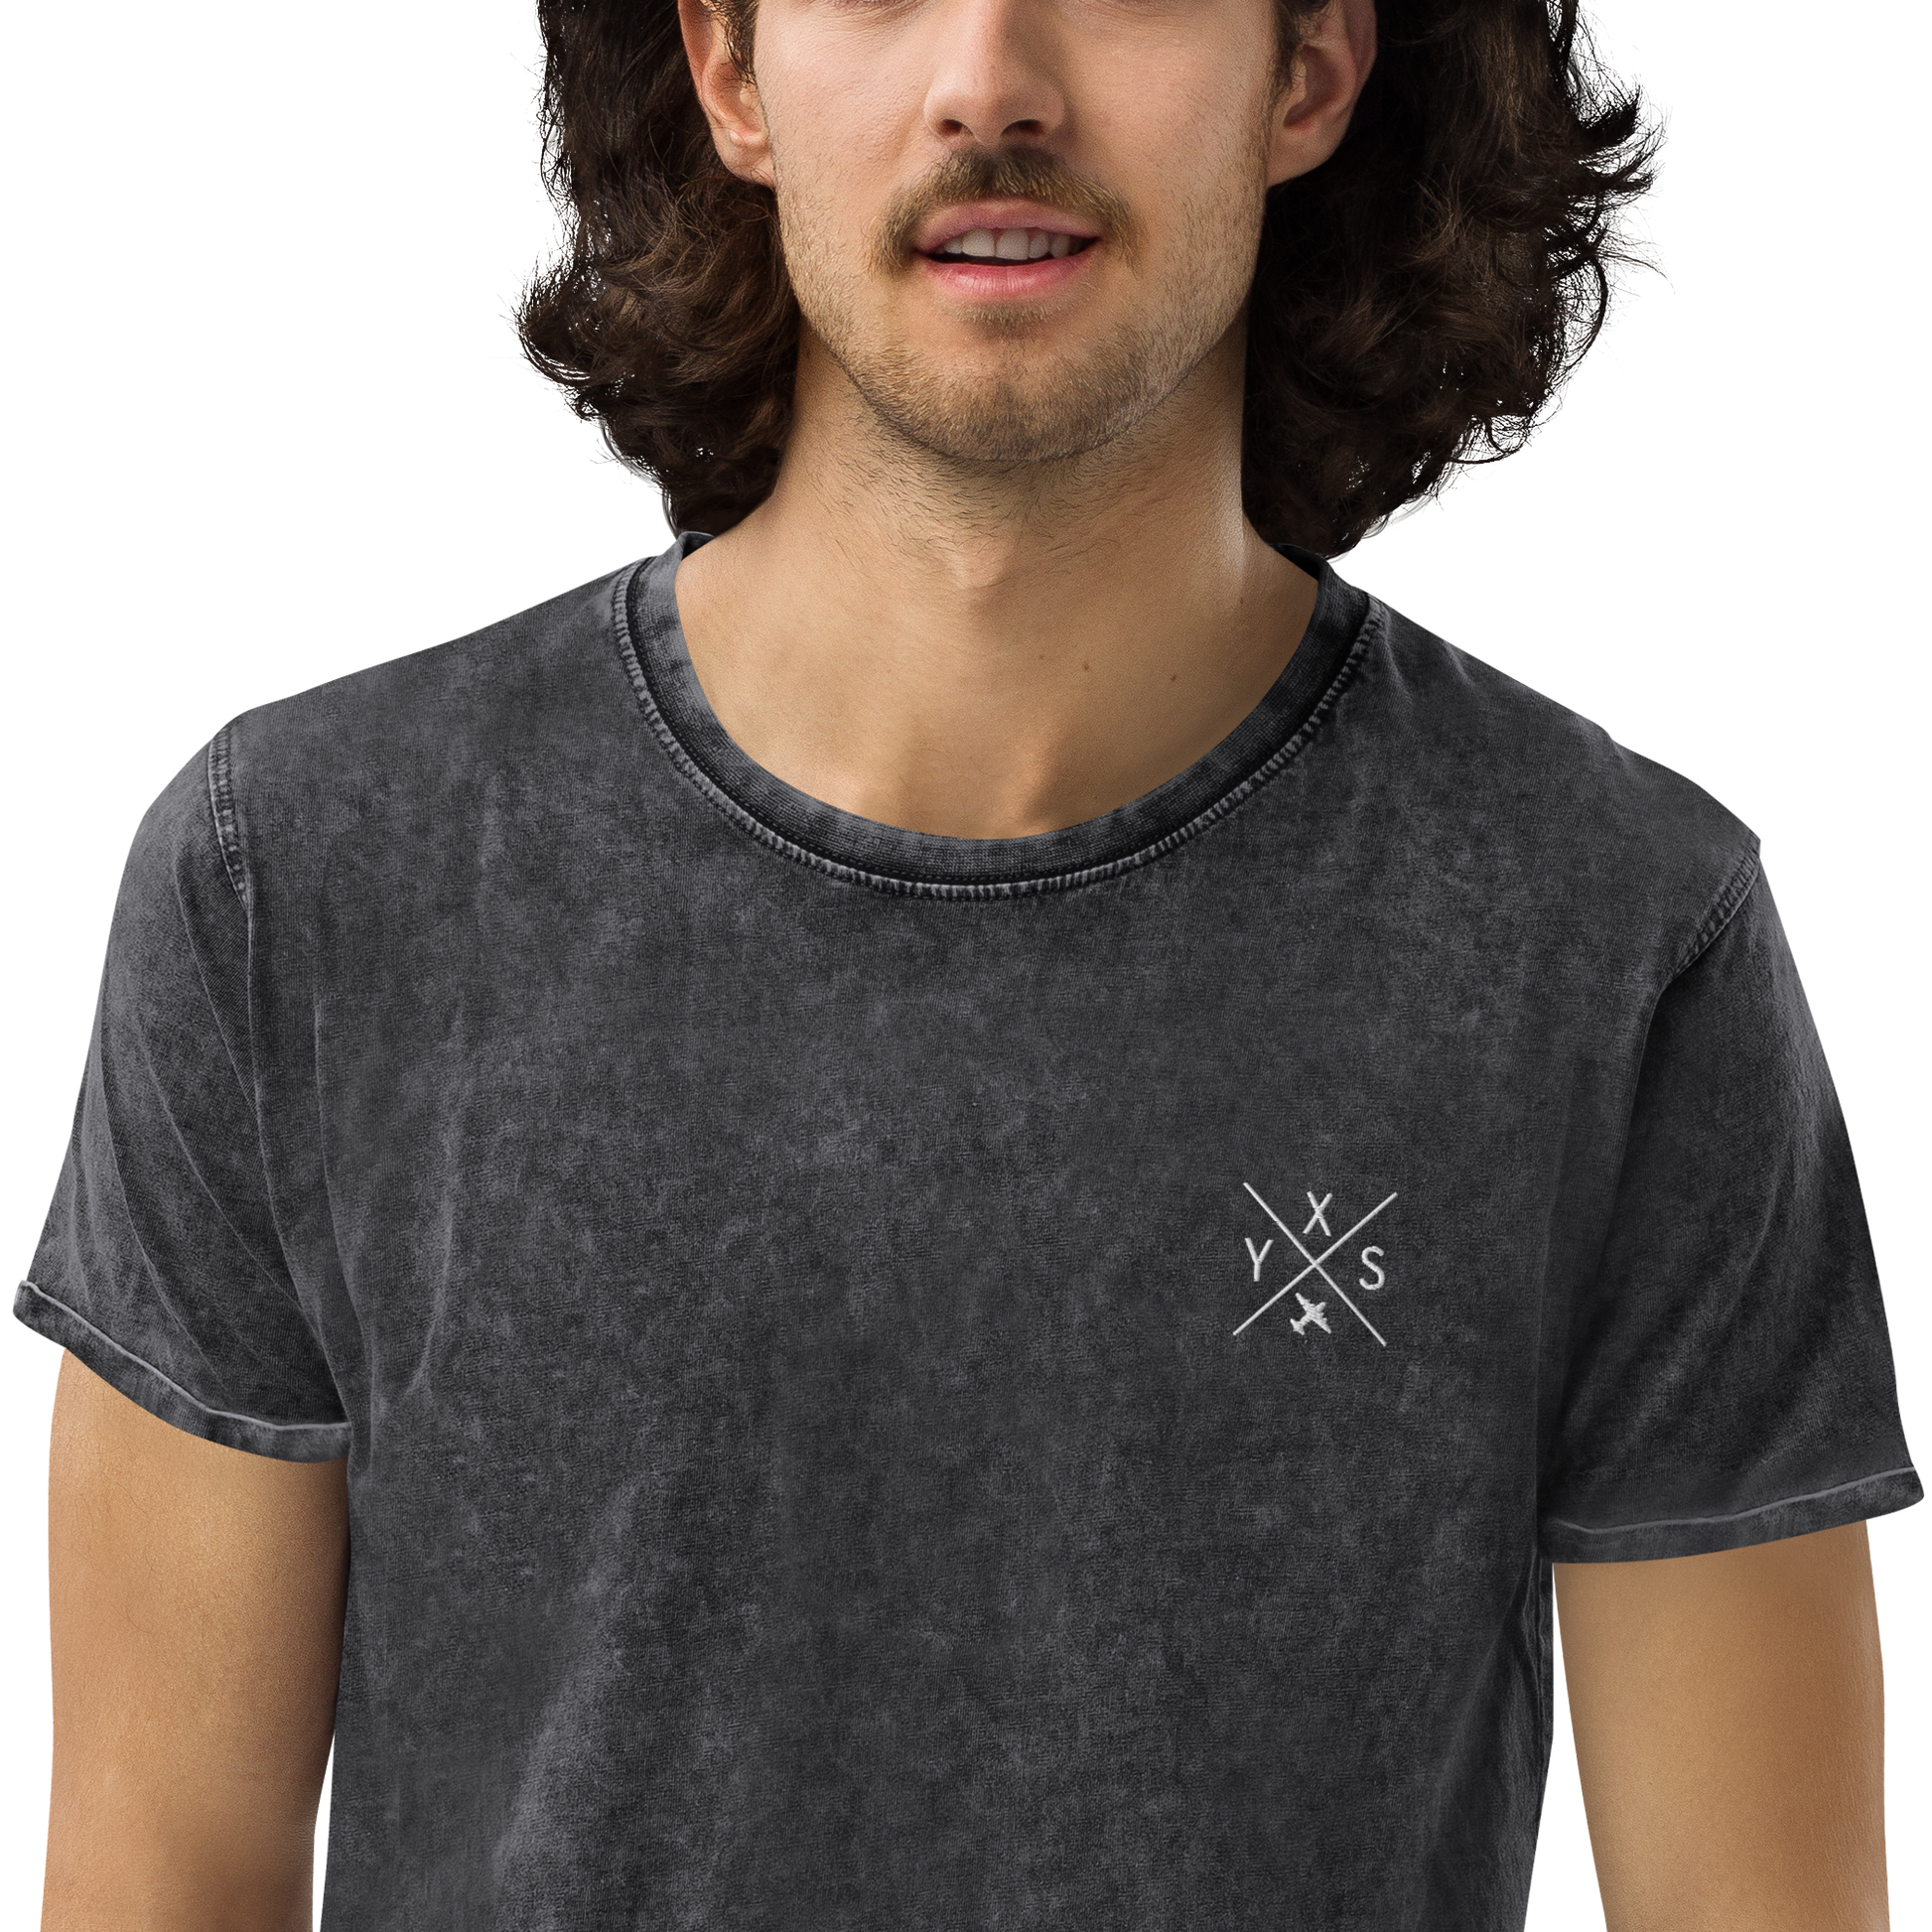 YHM Designs - YXS Prince George Denim T-Shirt - Crossed-X Design with Airport Code and Vintage Propliner - White Embroidery - Image 07